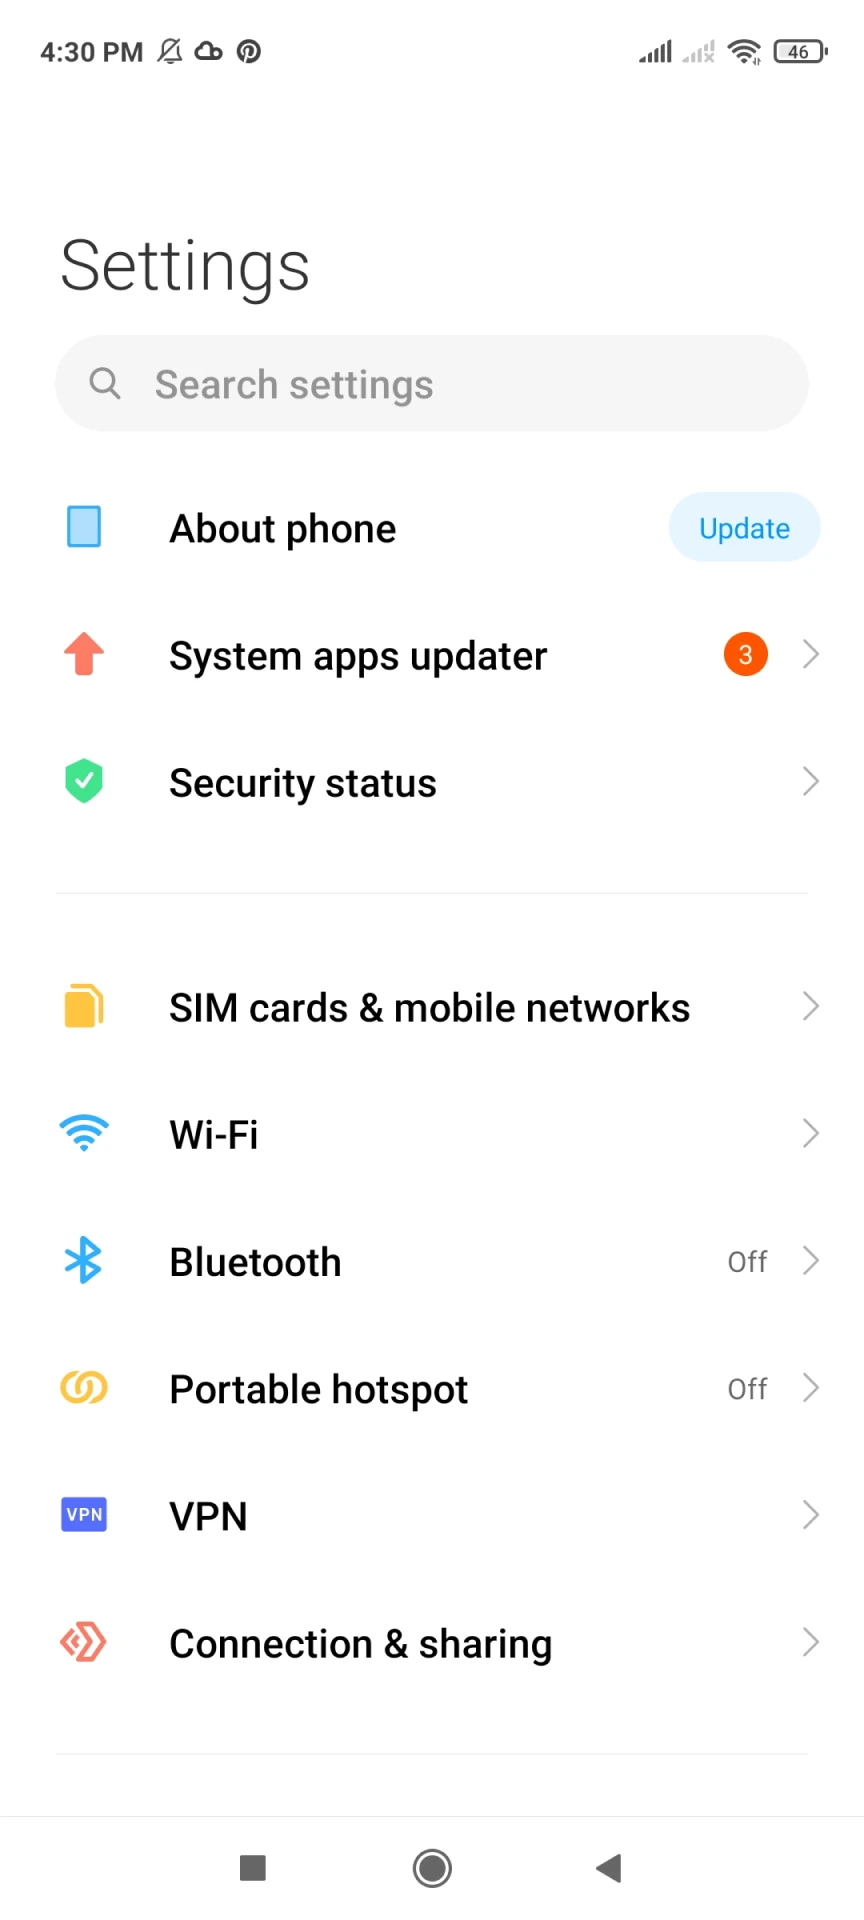 Change your smartphone settings to allow installing apps from unknown sources.